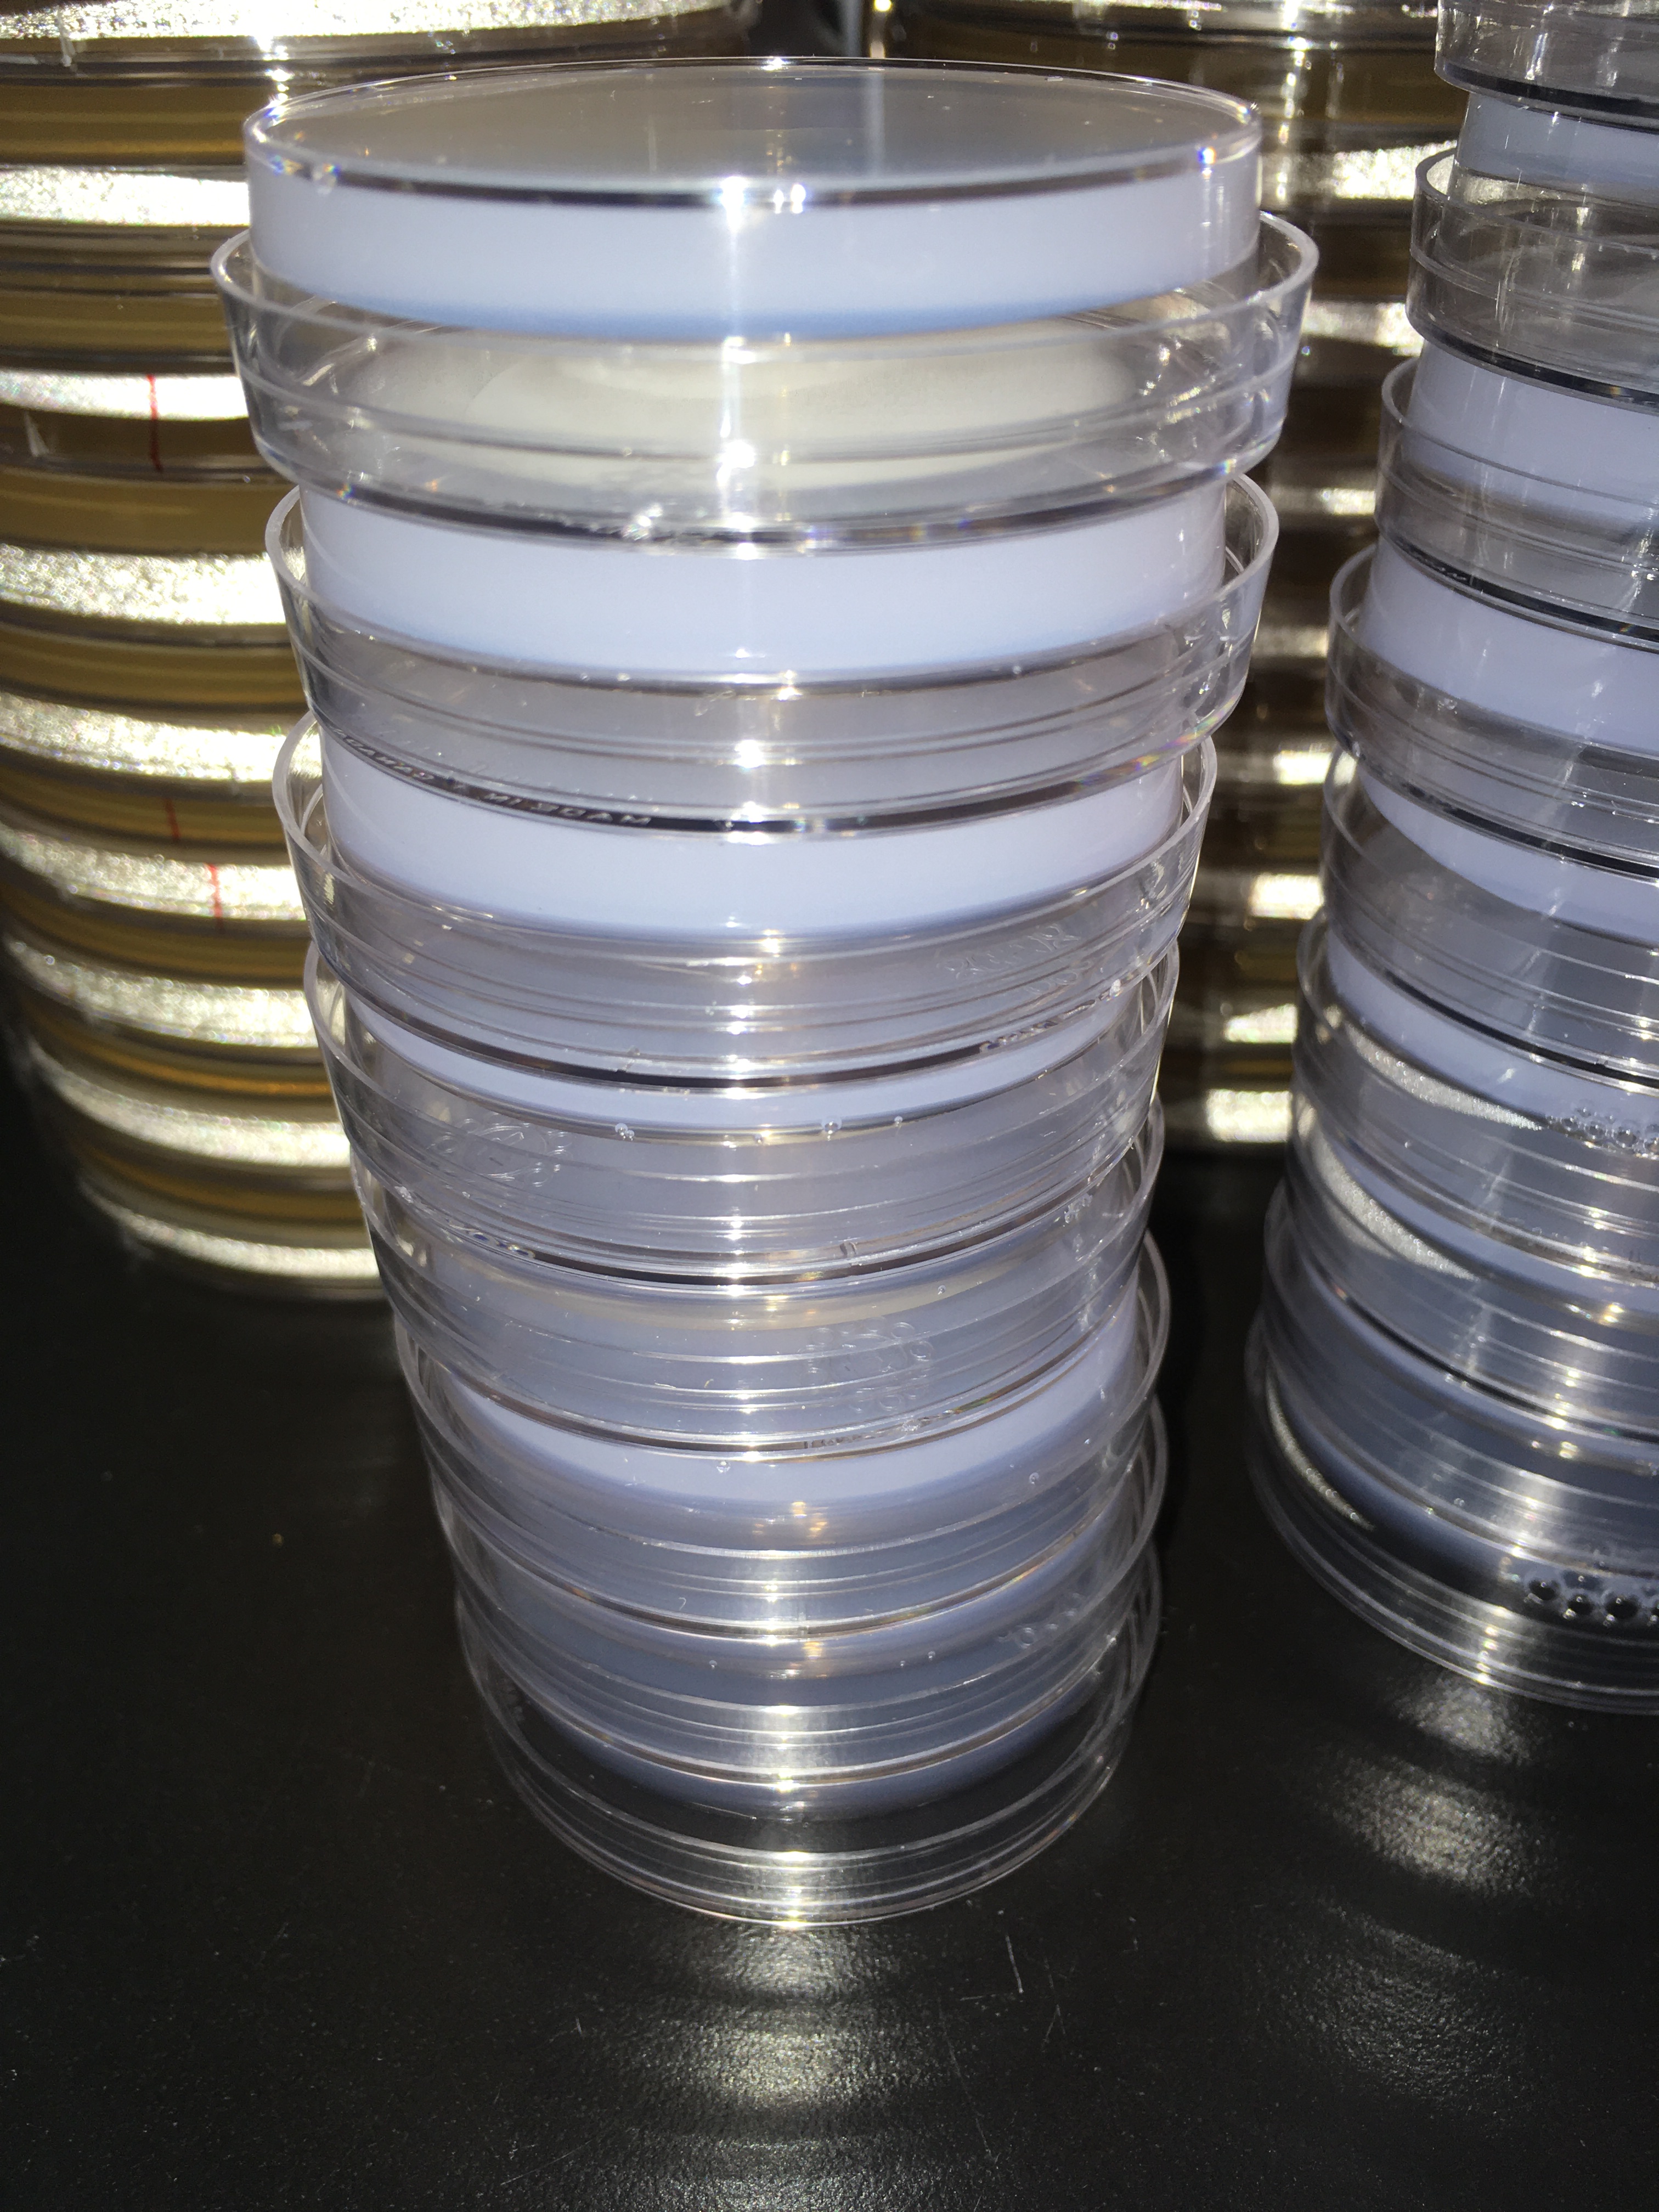 Multiple agar plates with a white one in front of the others